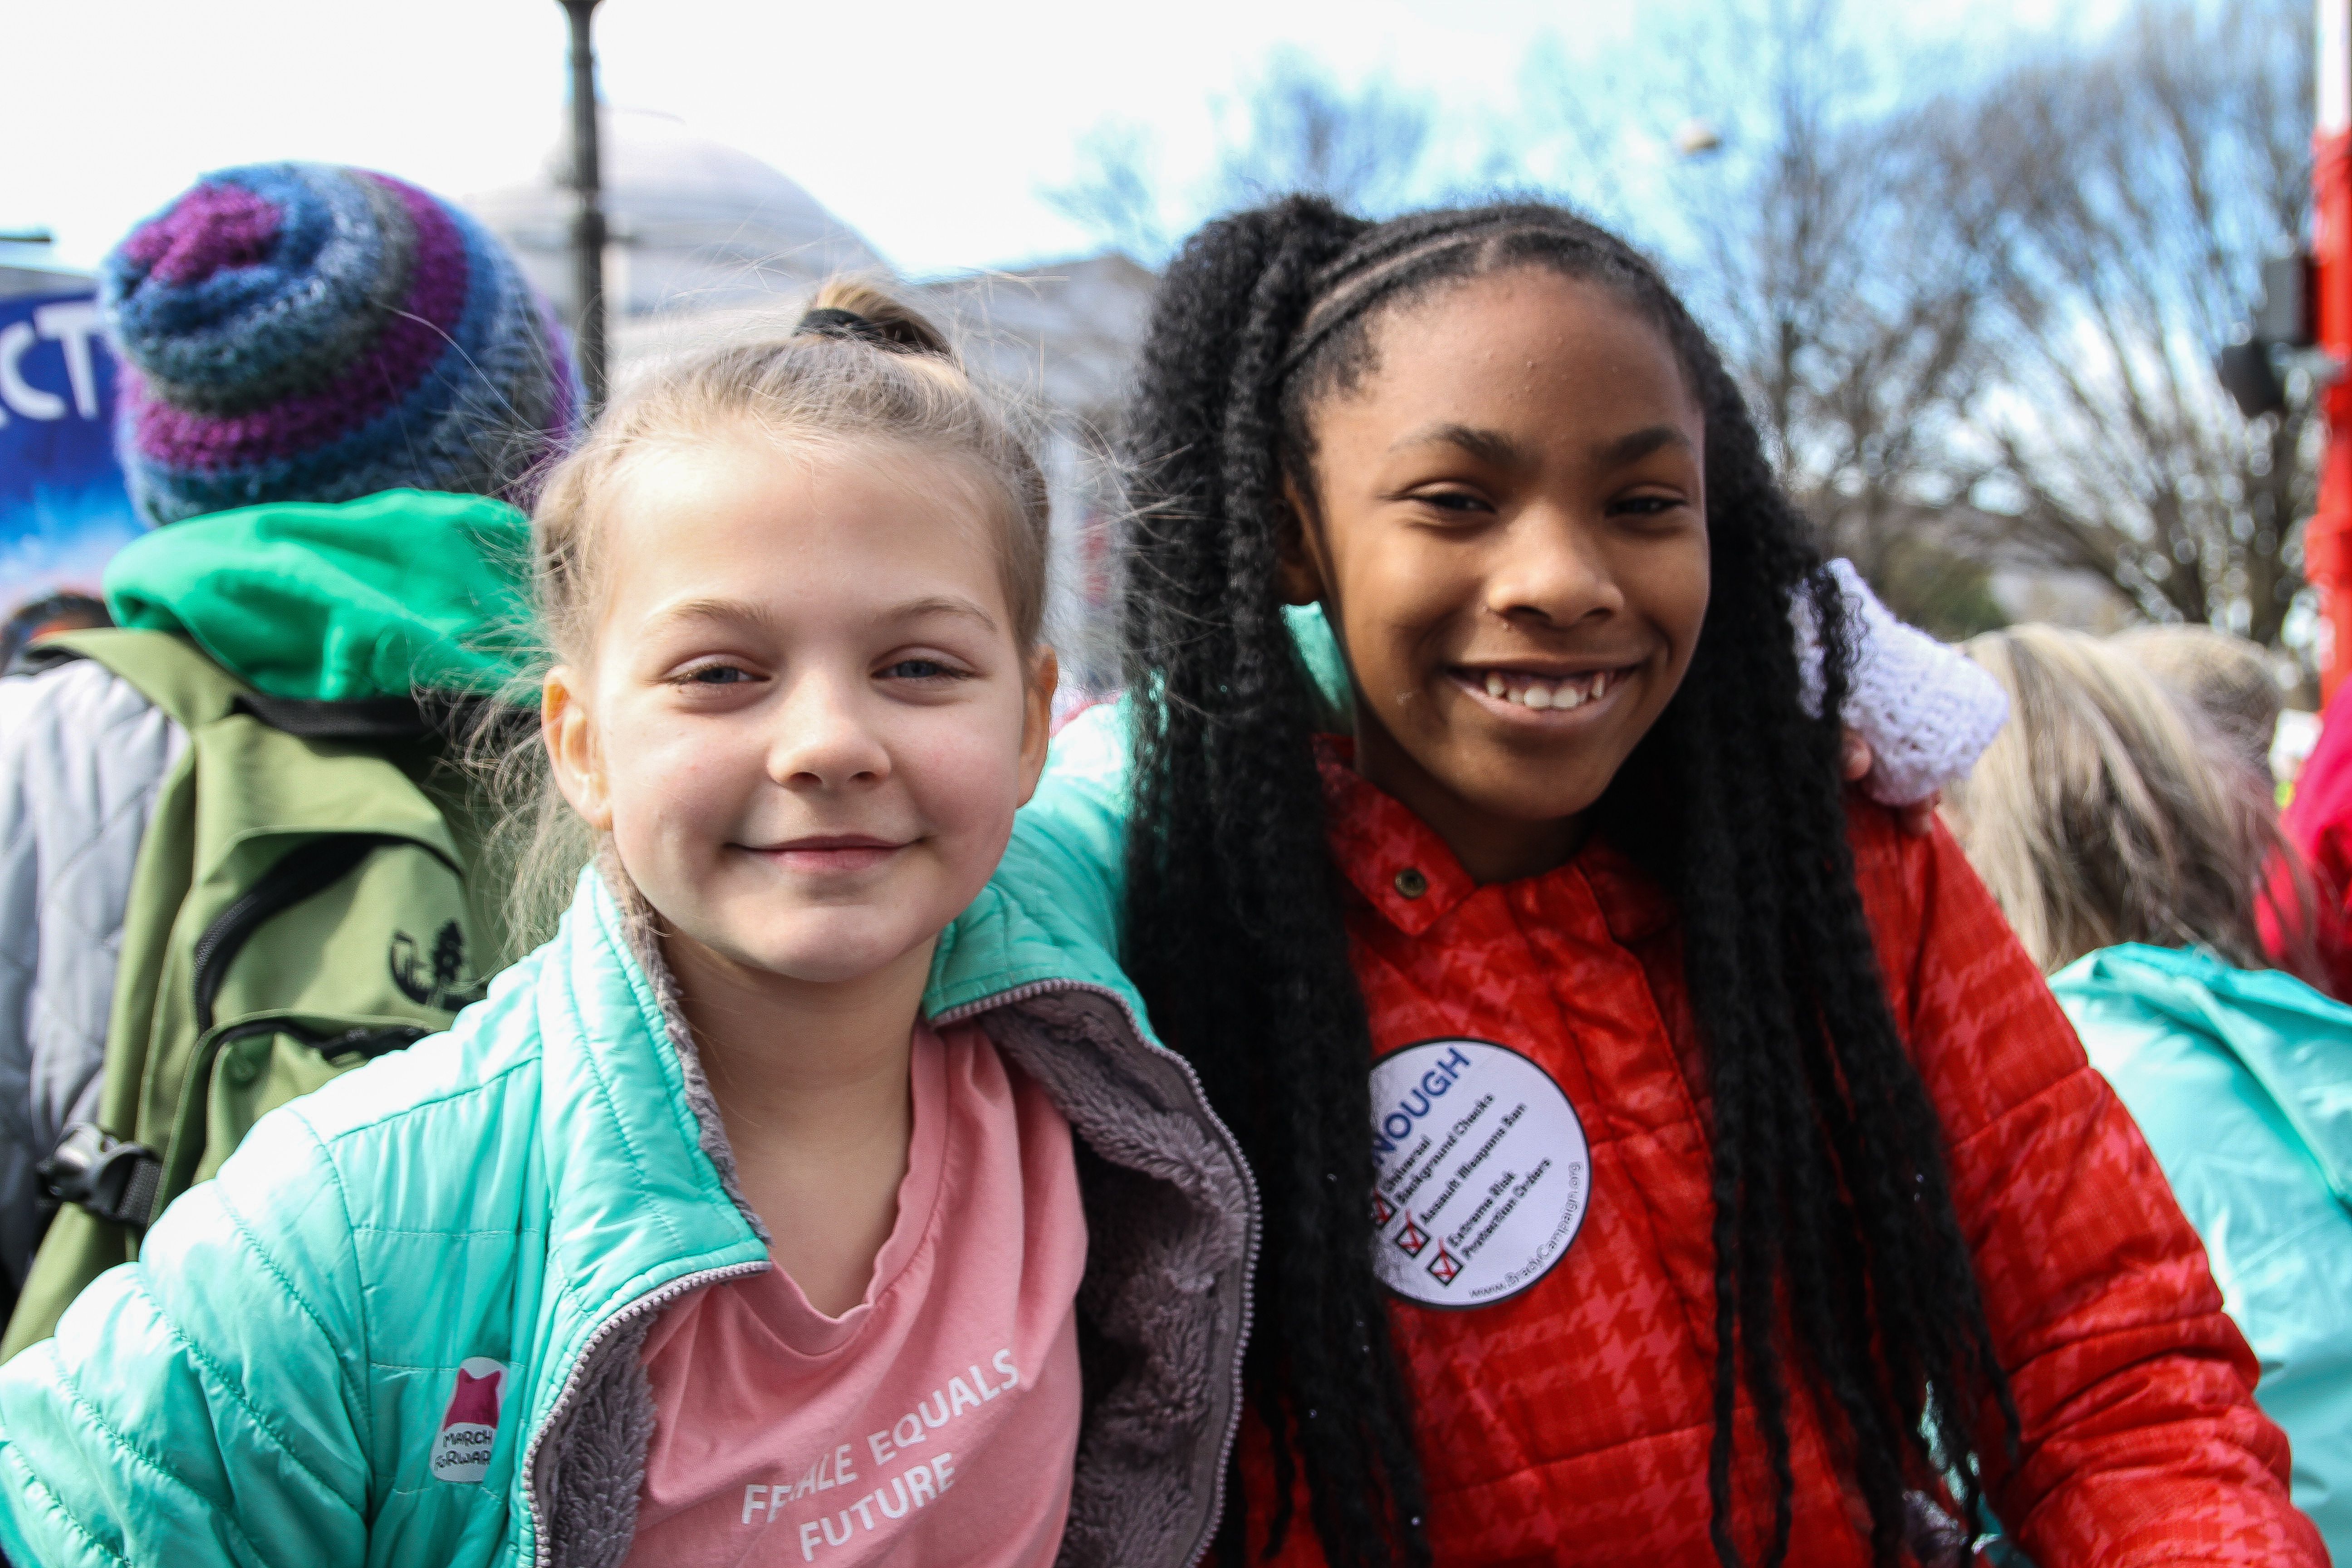 For some students, like Maddie Humphreys (left) and Destiny Clark (right), this was their first time attending a march. Image by Alyssa Sperrazza. United States, 2018.